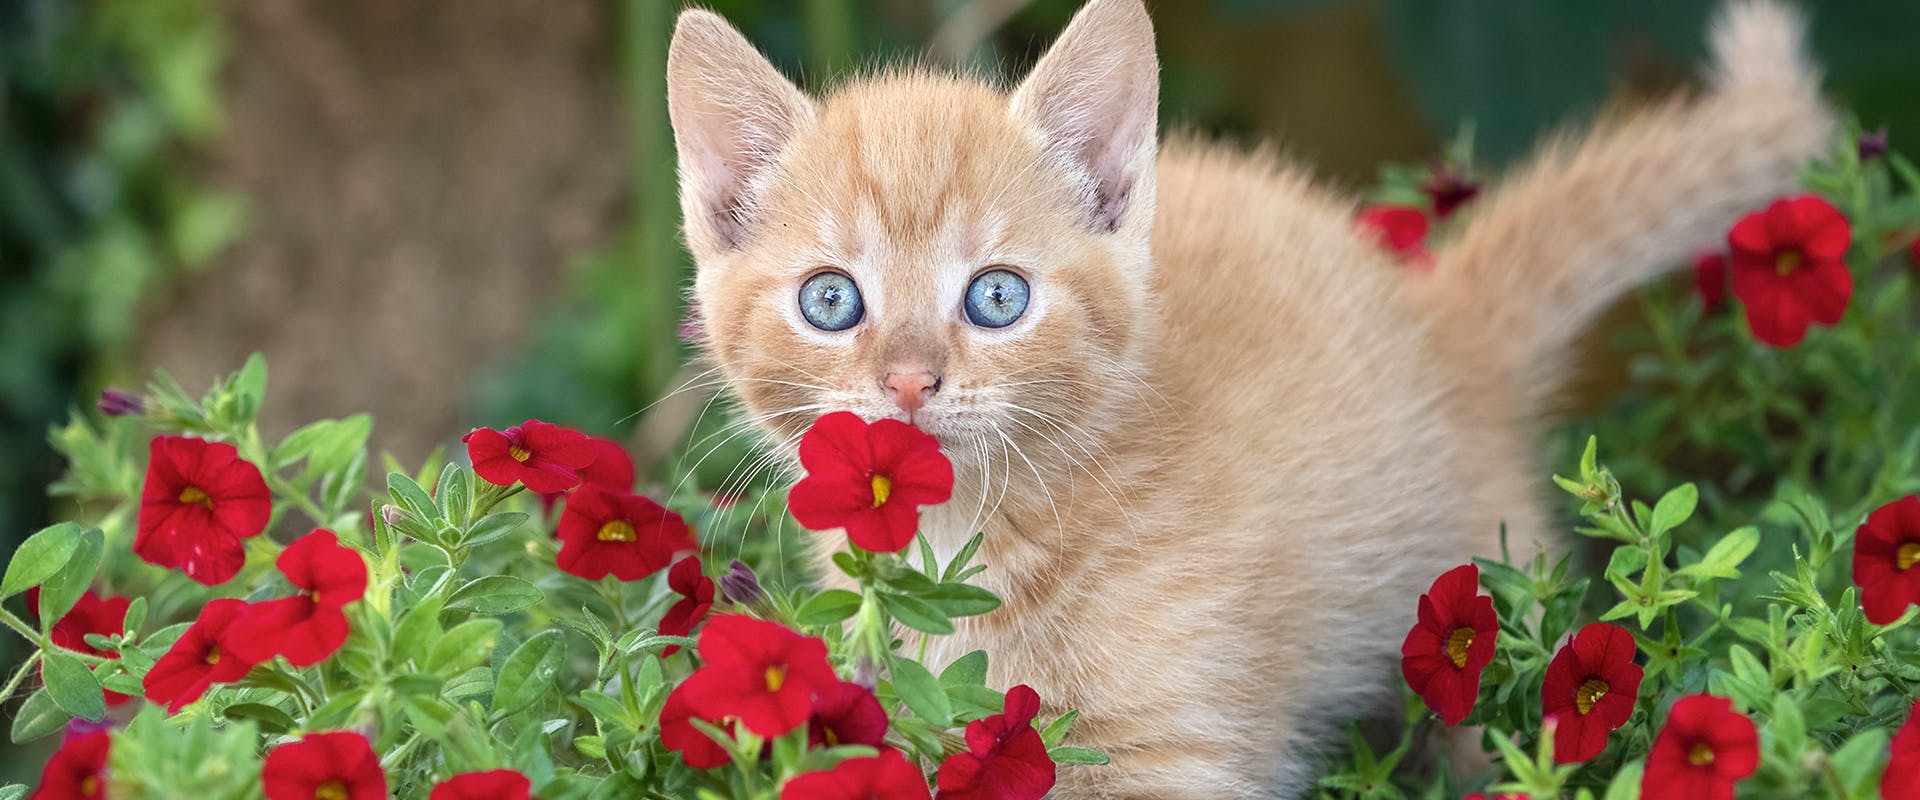 A small kitten standing in a bed of flowers